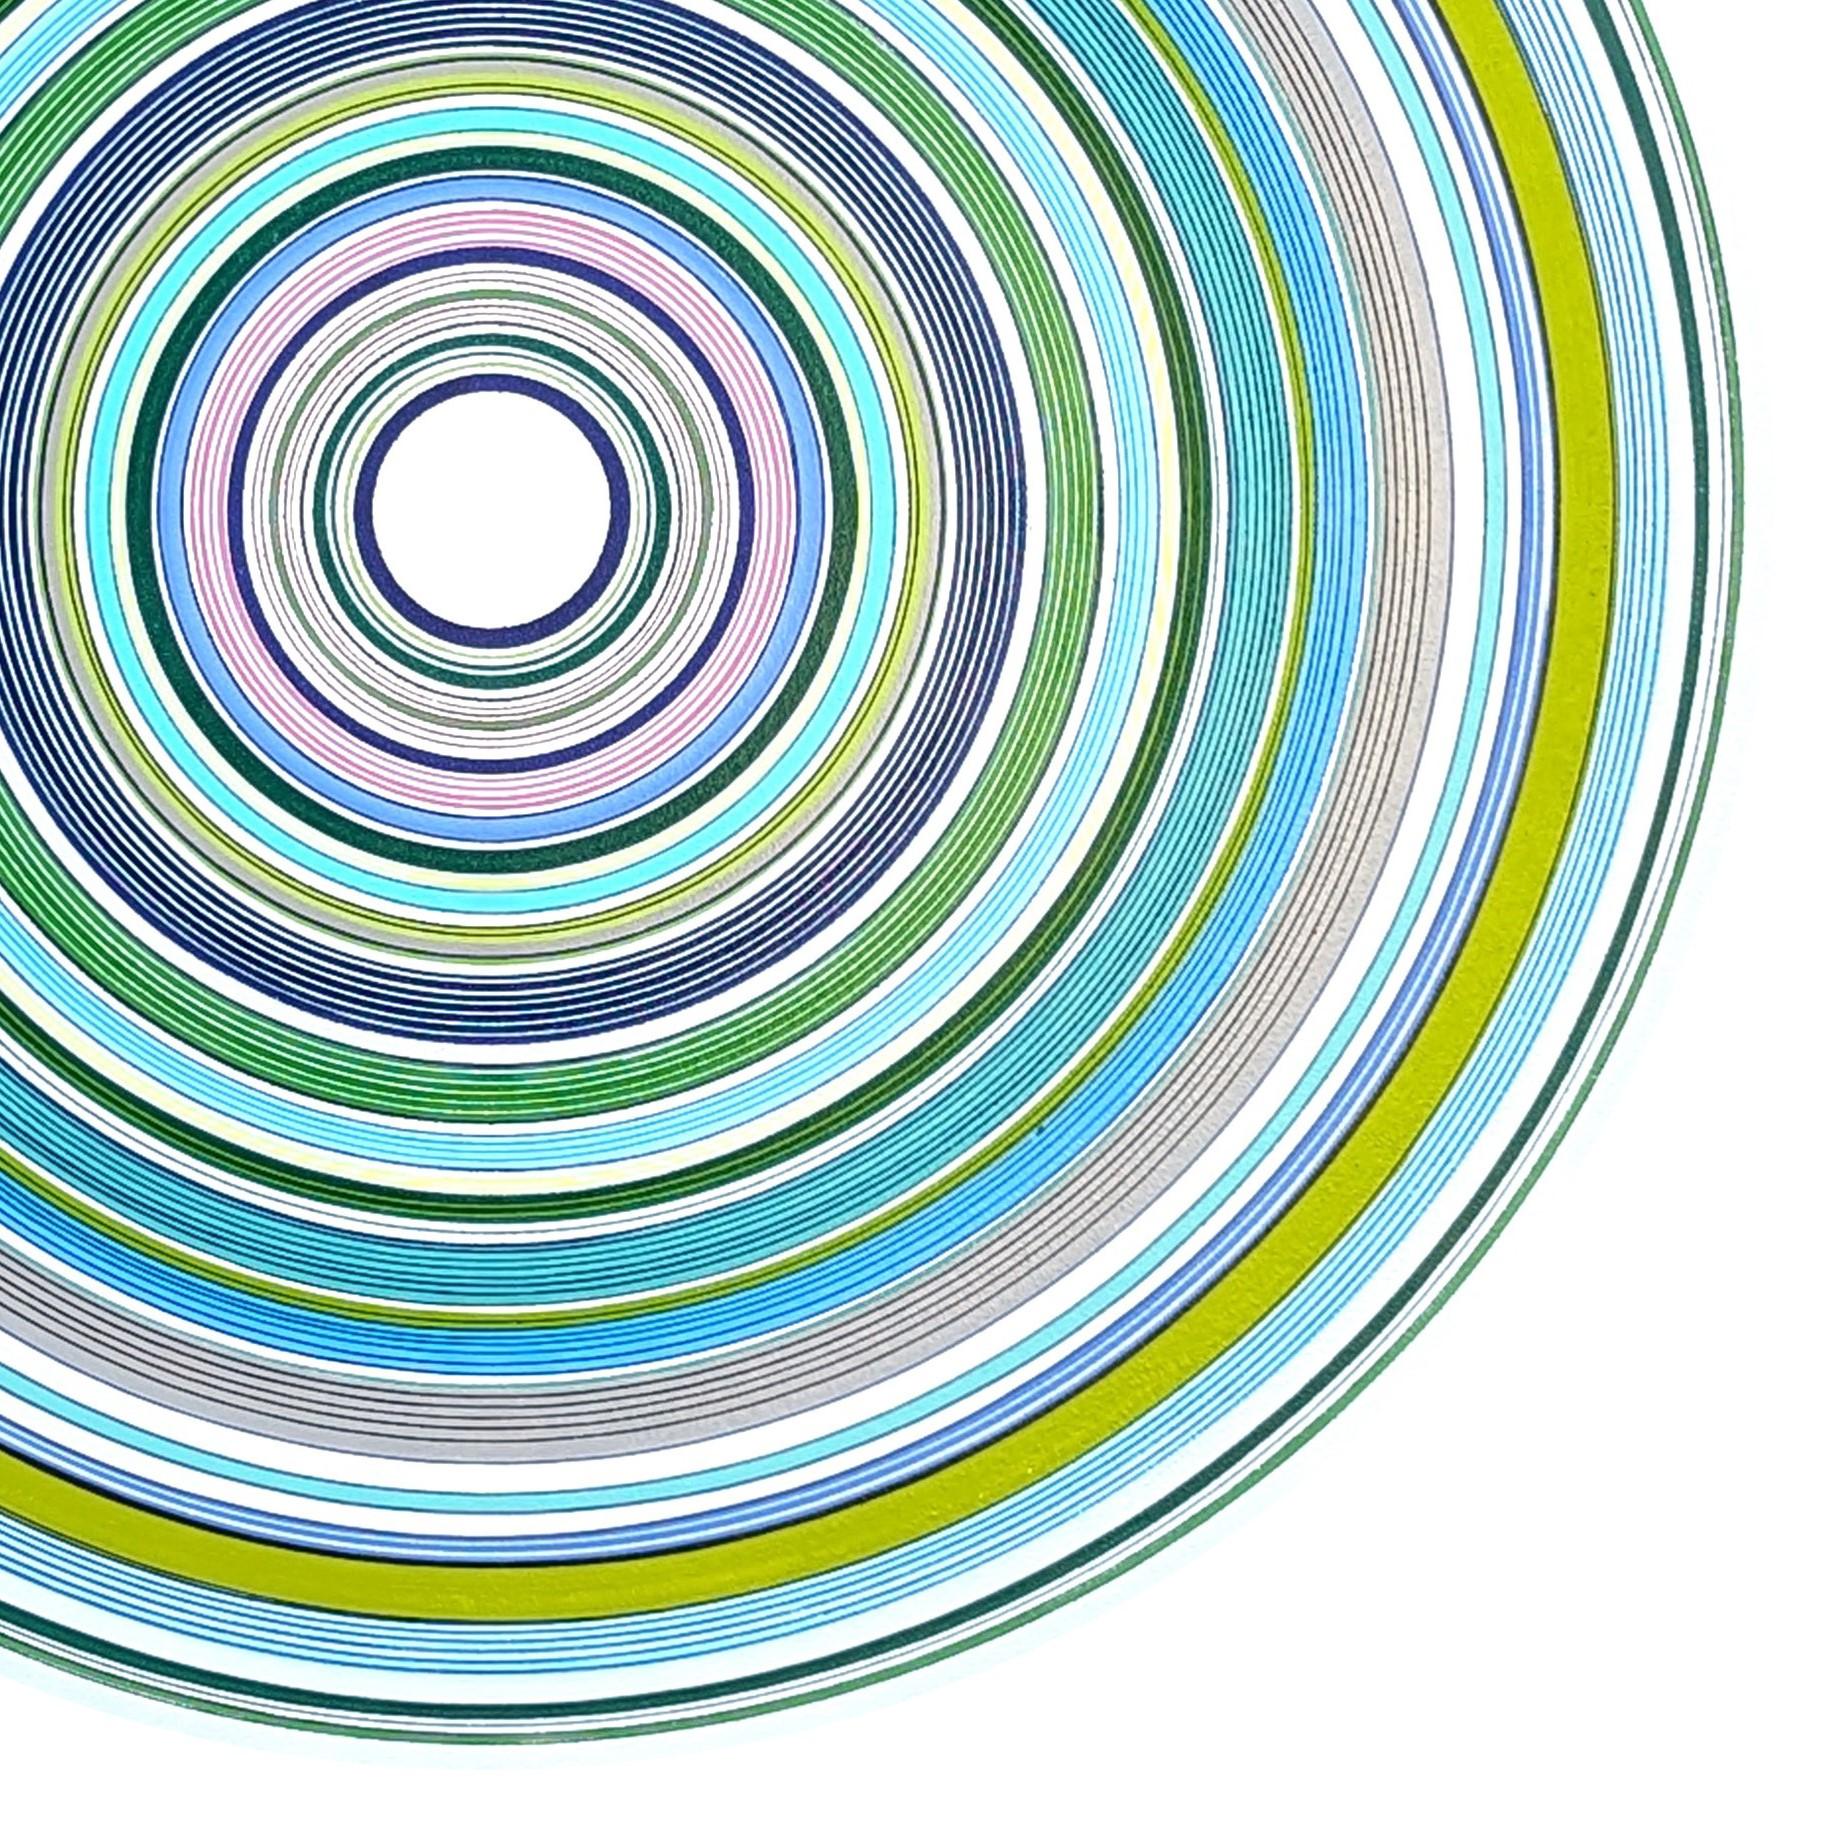 “Year of Love” Contemporary Blue, Green, and Navy Concentric Circle Painting 2